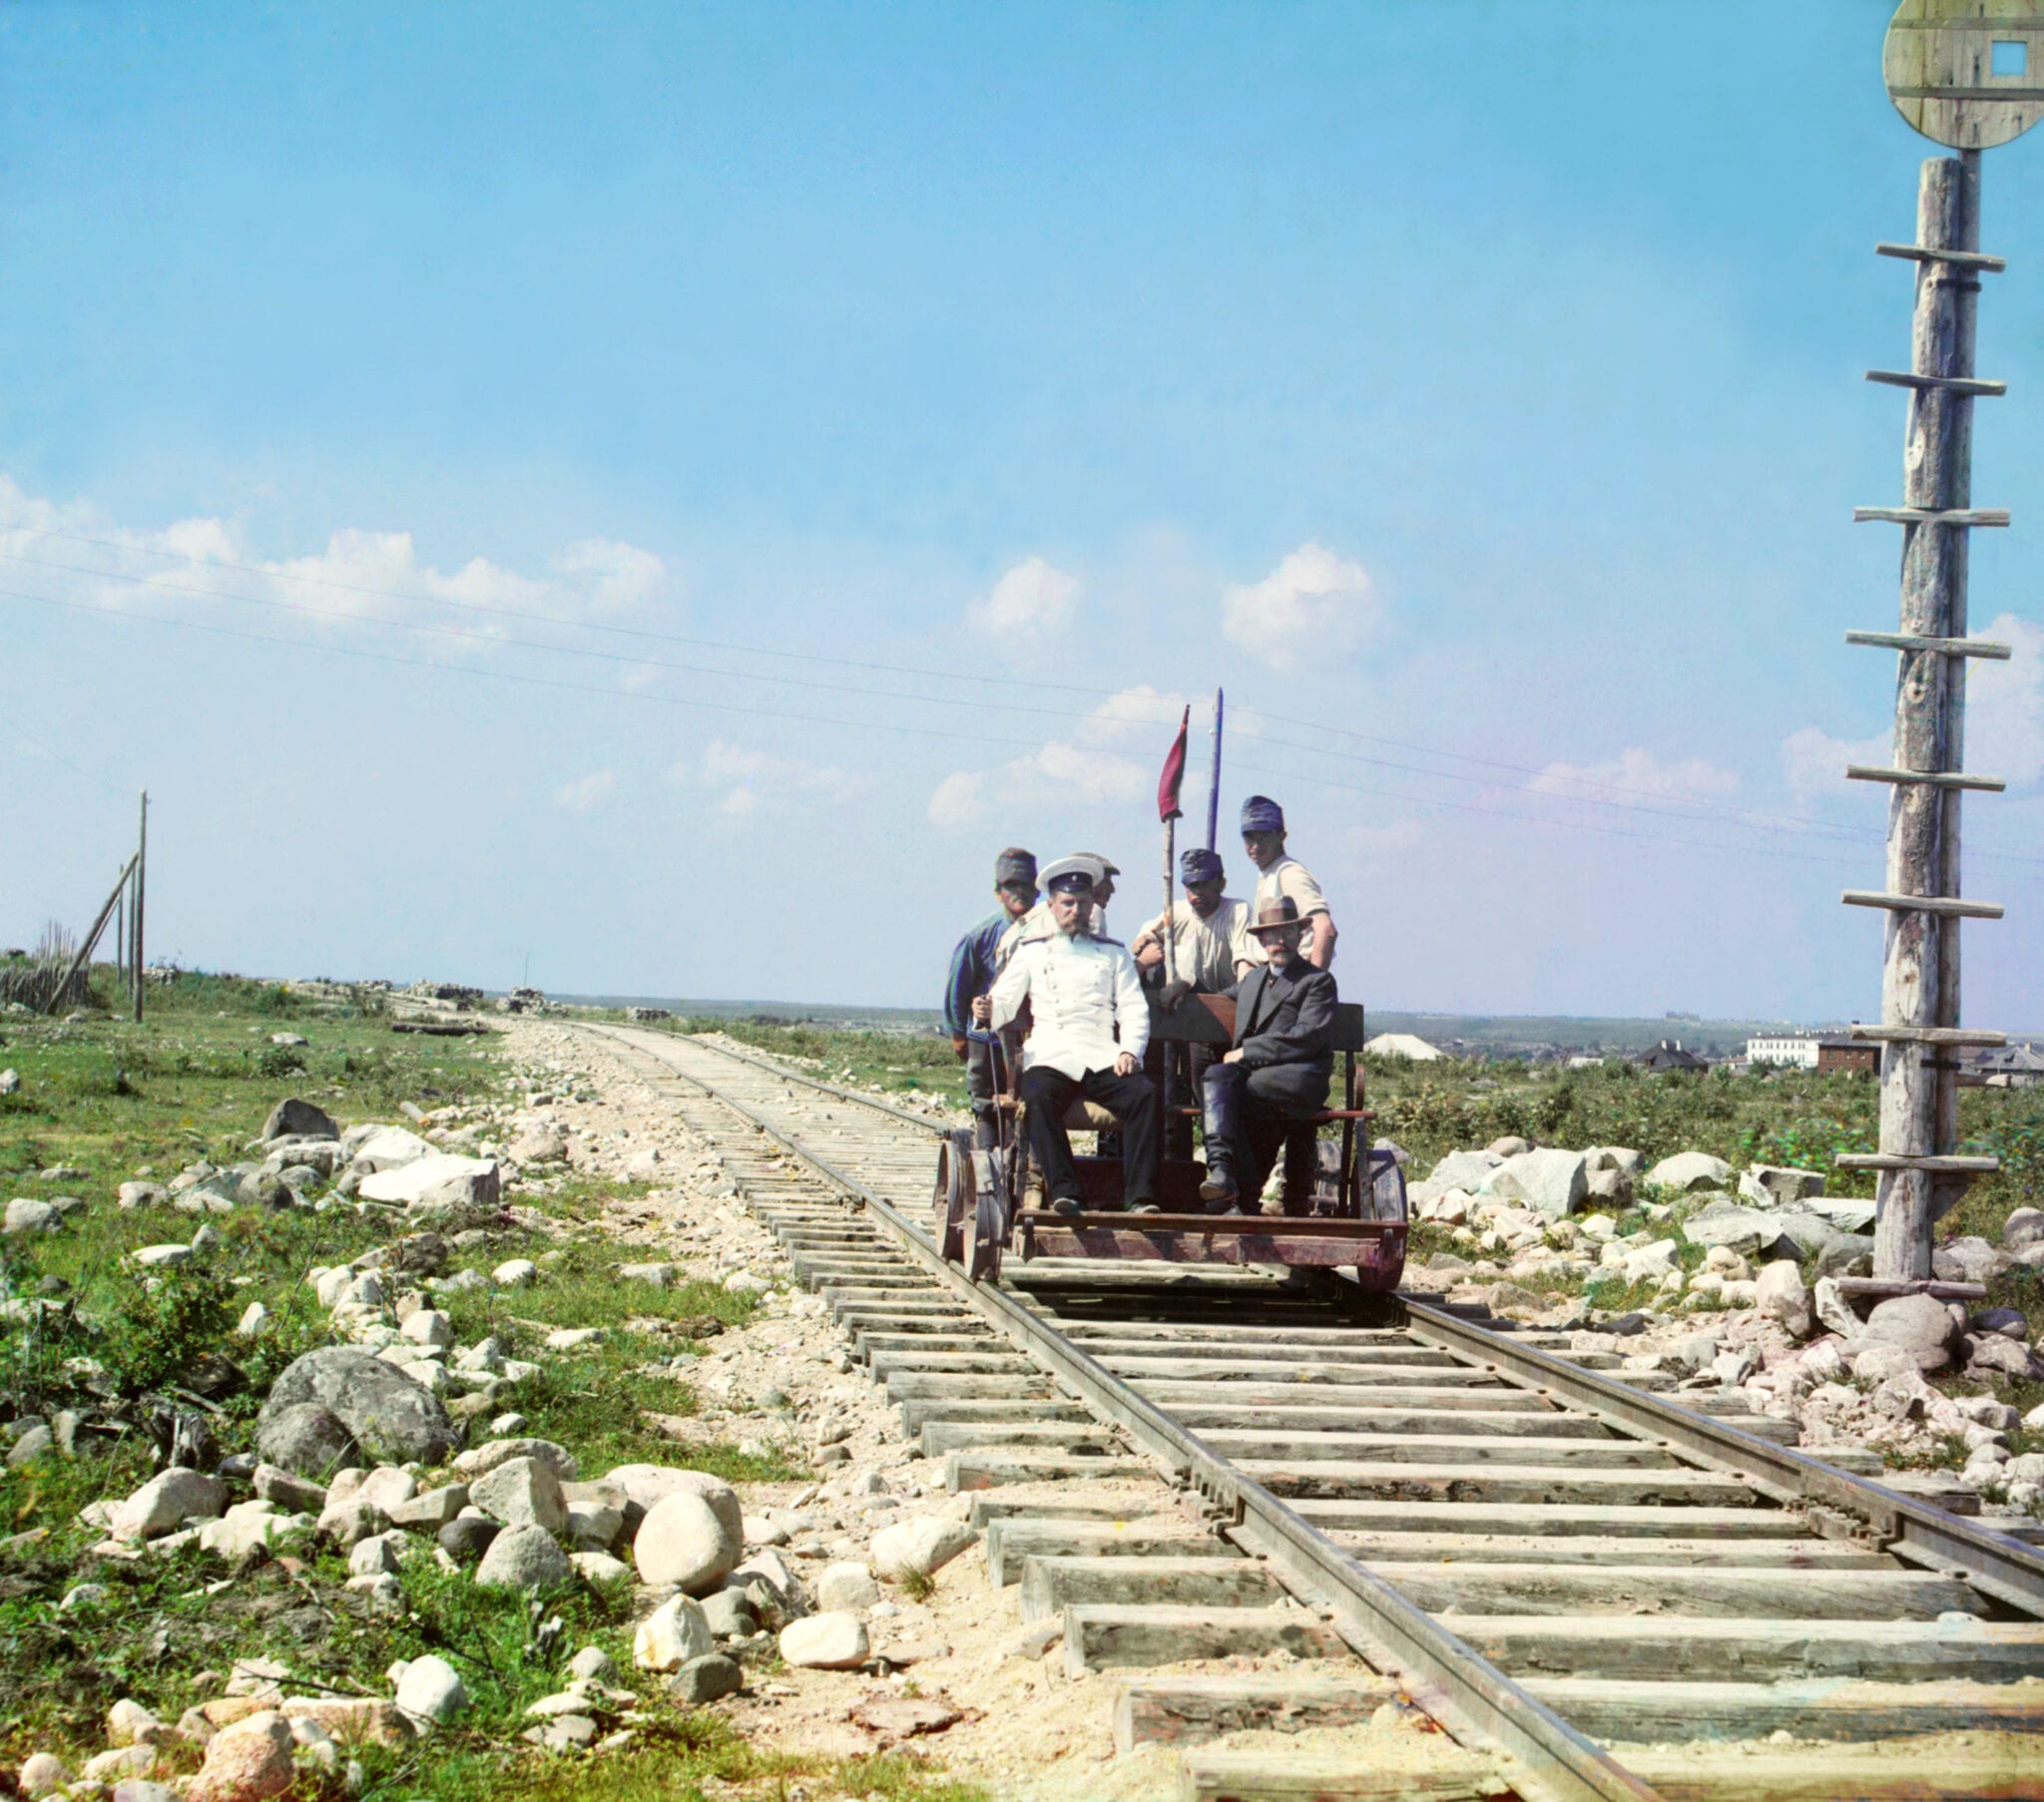 Photographs by the Russian pioneer in color photography, Sergey Prokudin-Gorsky